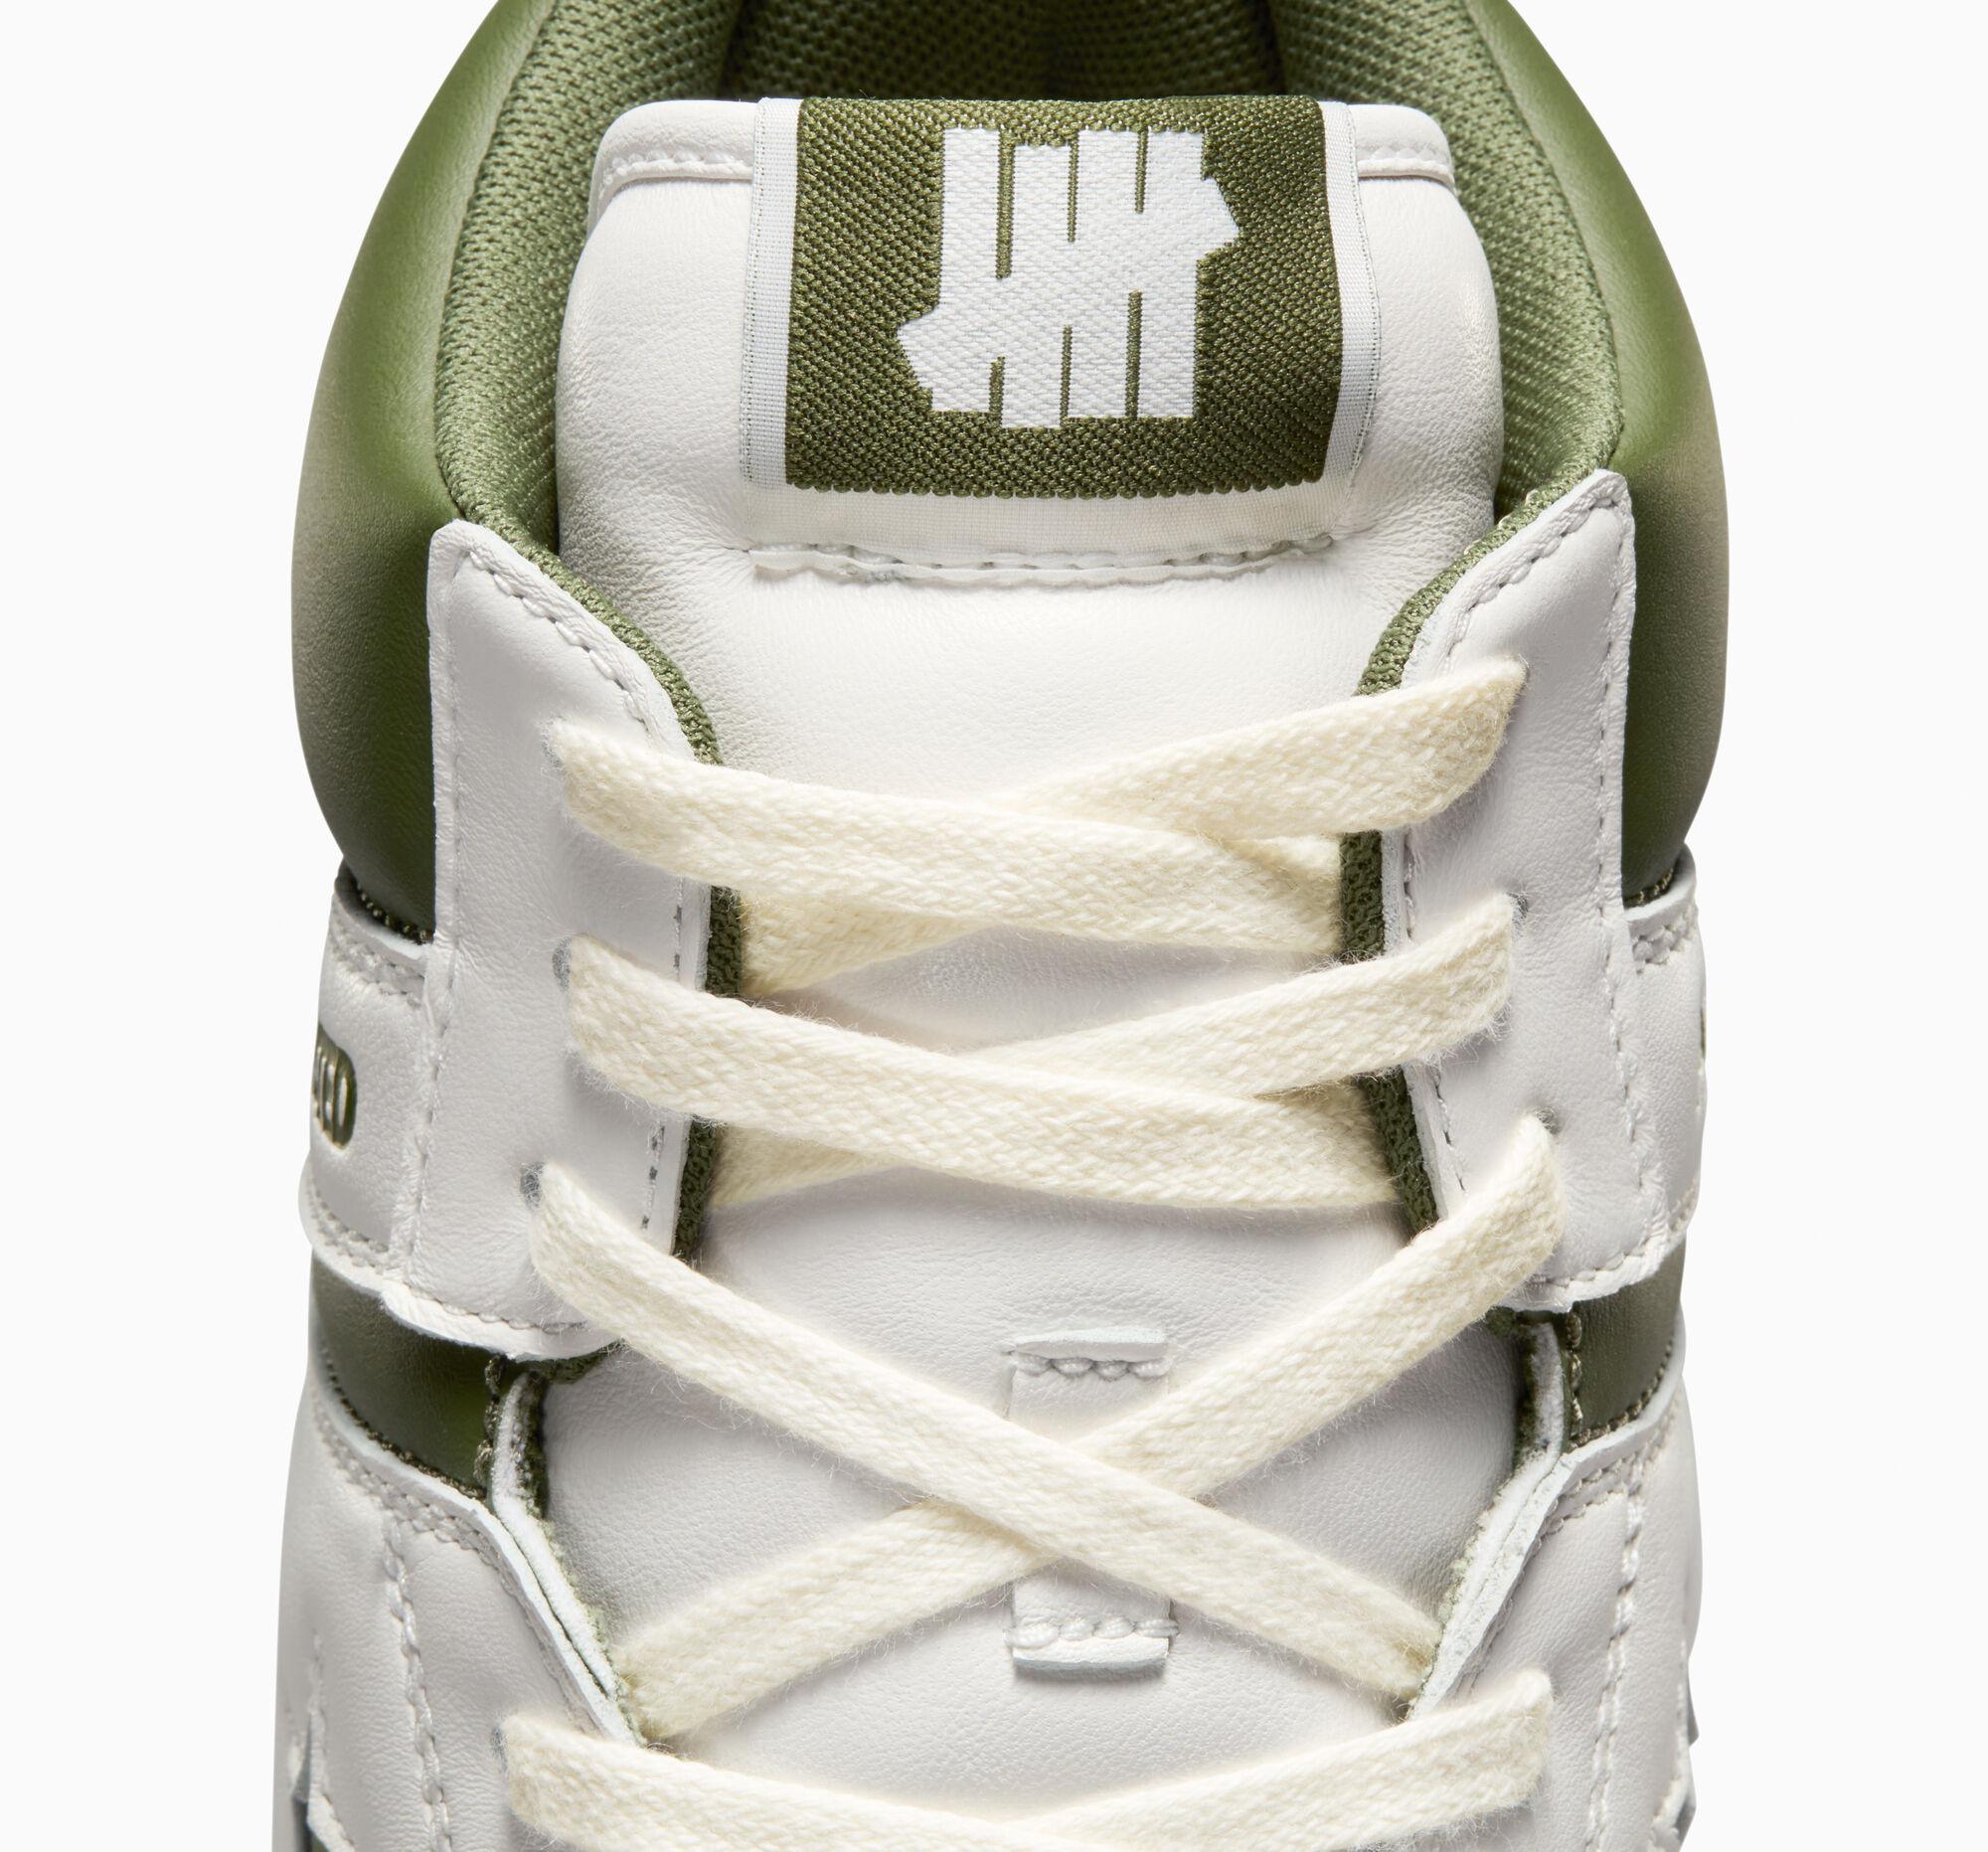 Undefeated x Converse 'Chive' logo